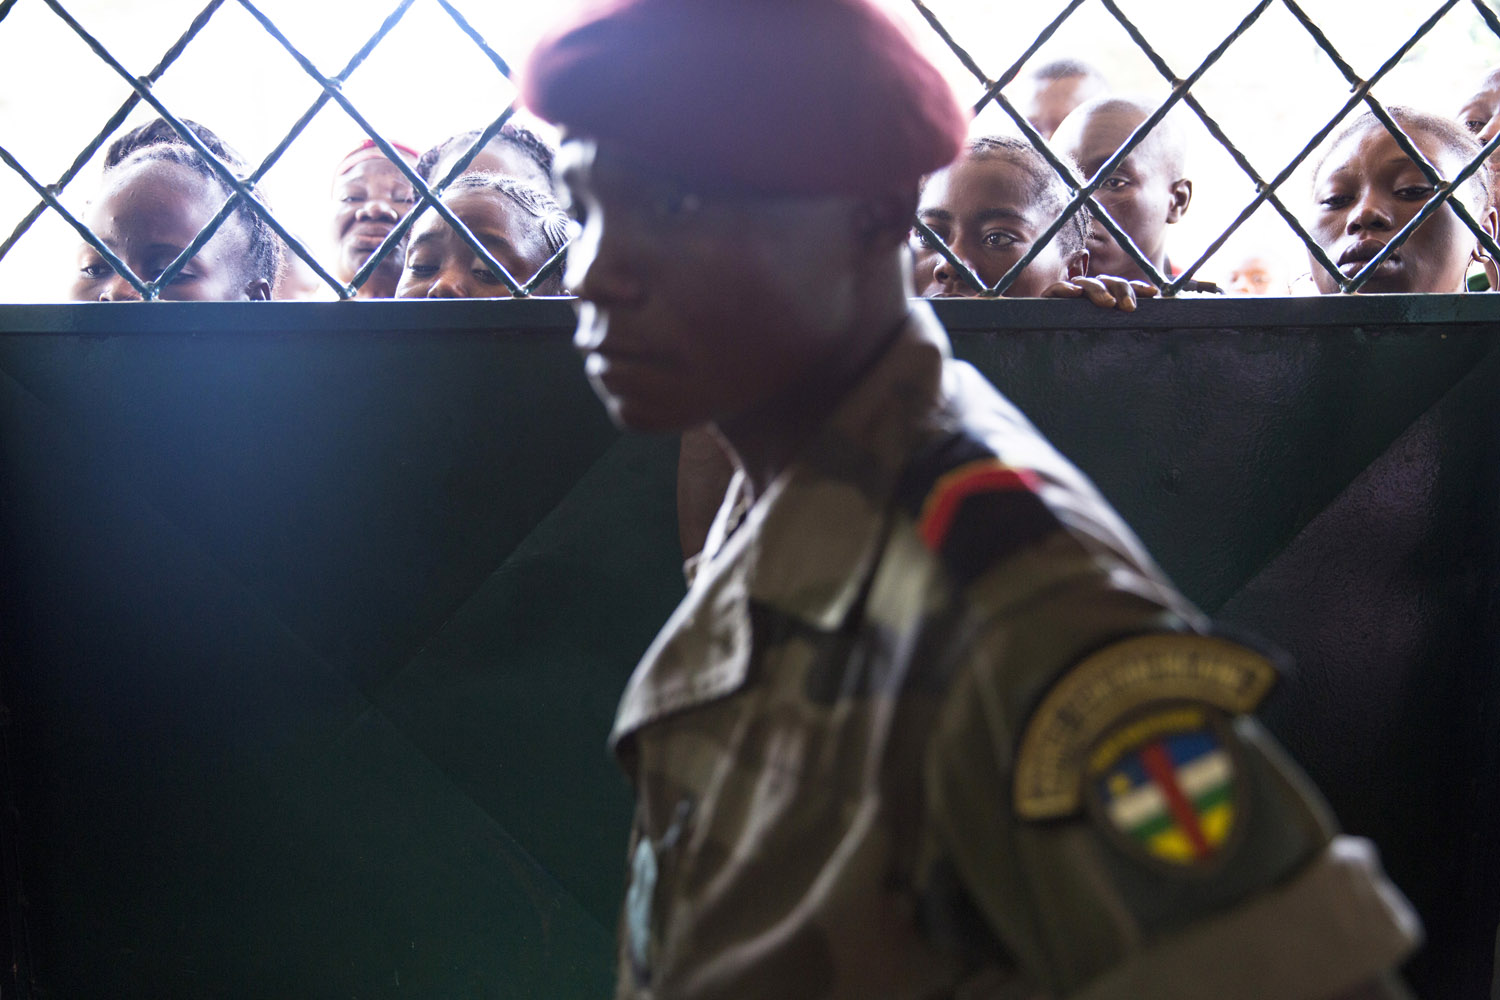 The Family of army soldier Tanguy Residou shot dead by members of the Seleka wait at the Morgue to collect the body for funeral. The man was a nephew of the president Bozizé. Murders and others exactions made the Seleka are increasing in the country. Bangui.